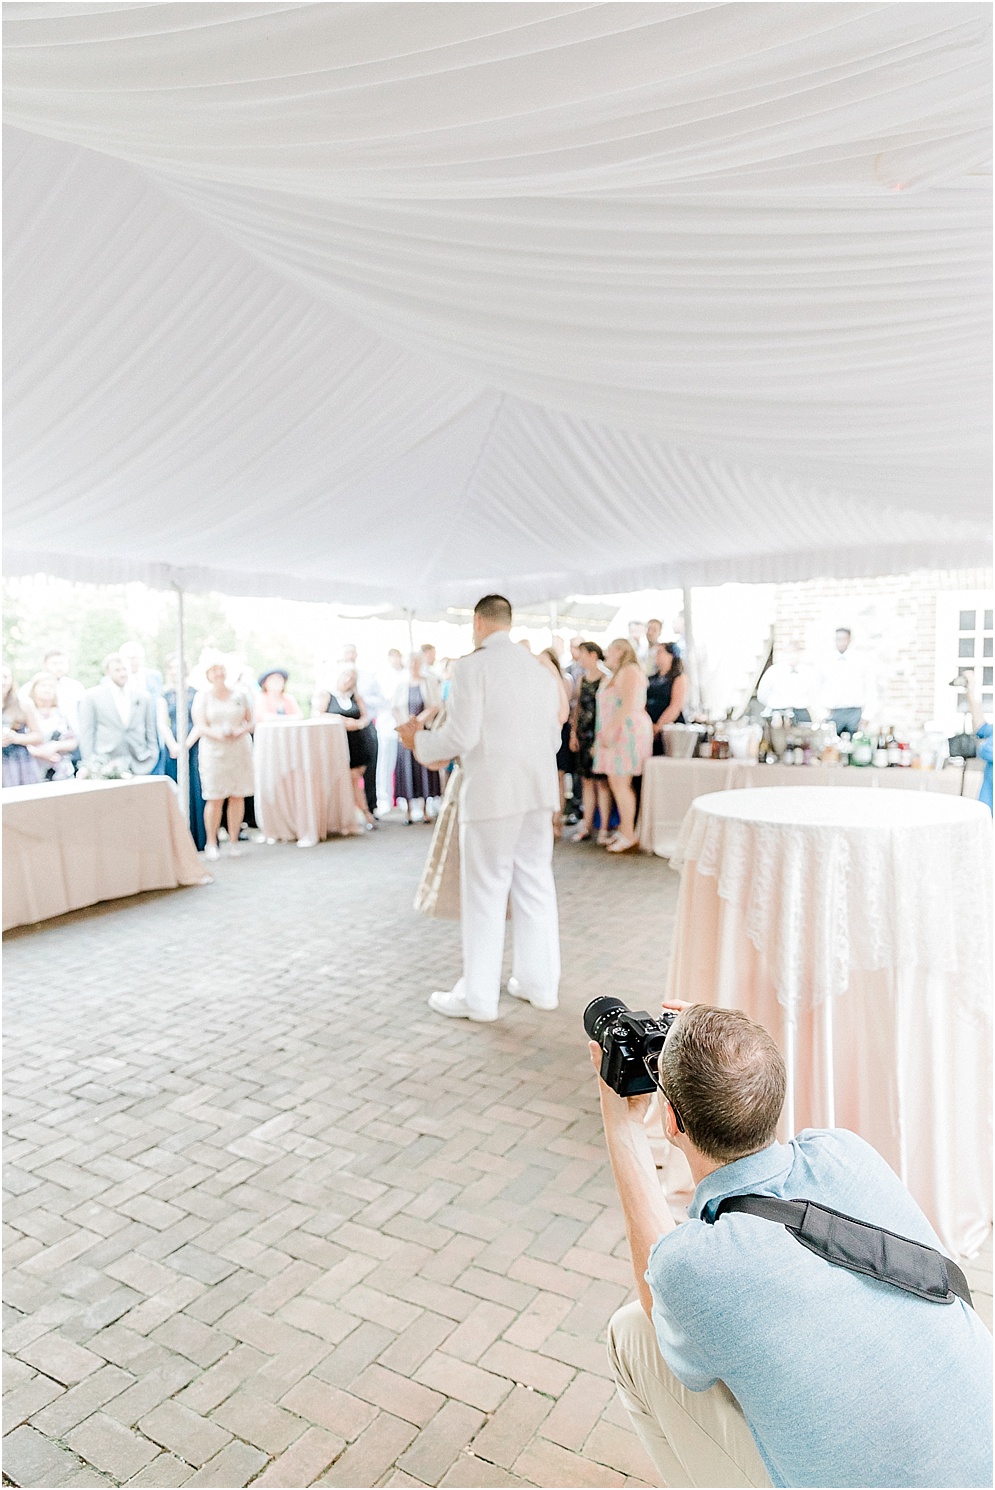 Our life as full time Annapolis wedding photographers.